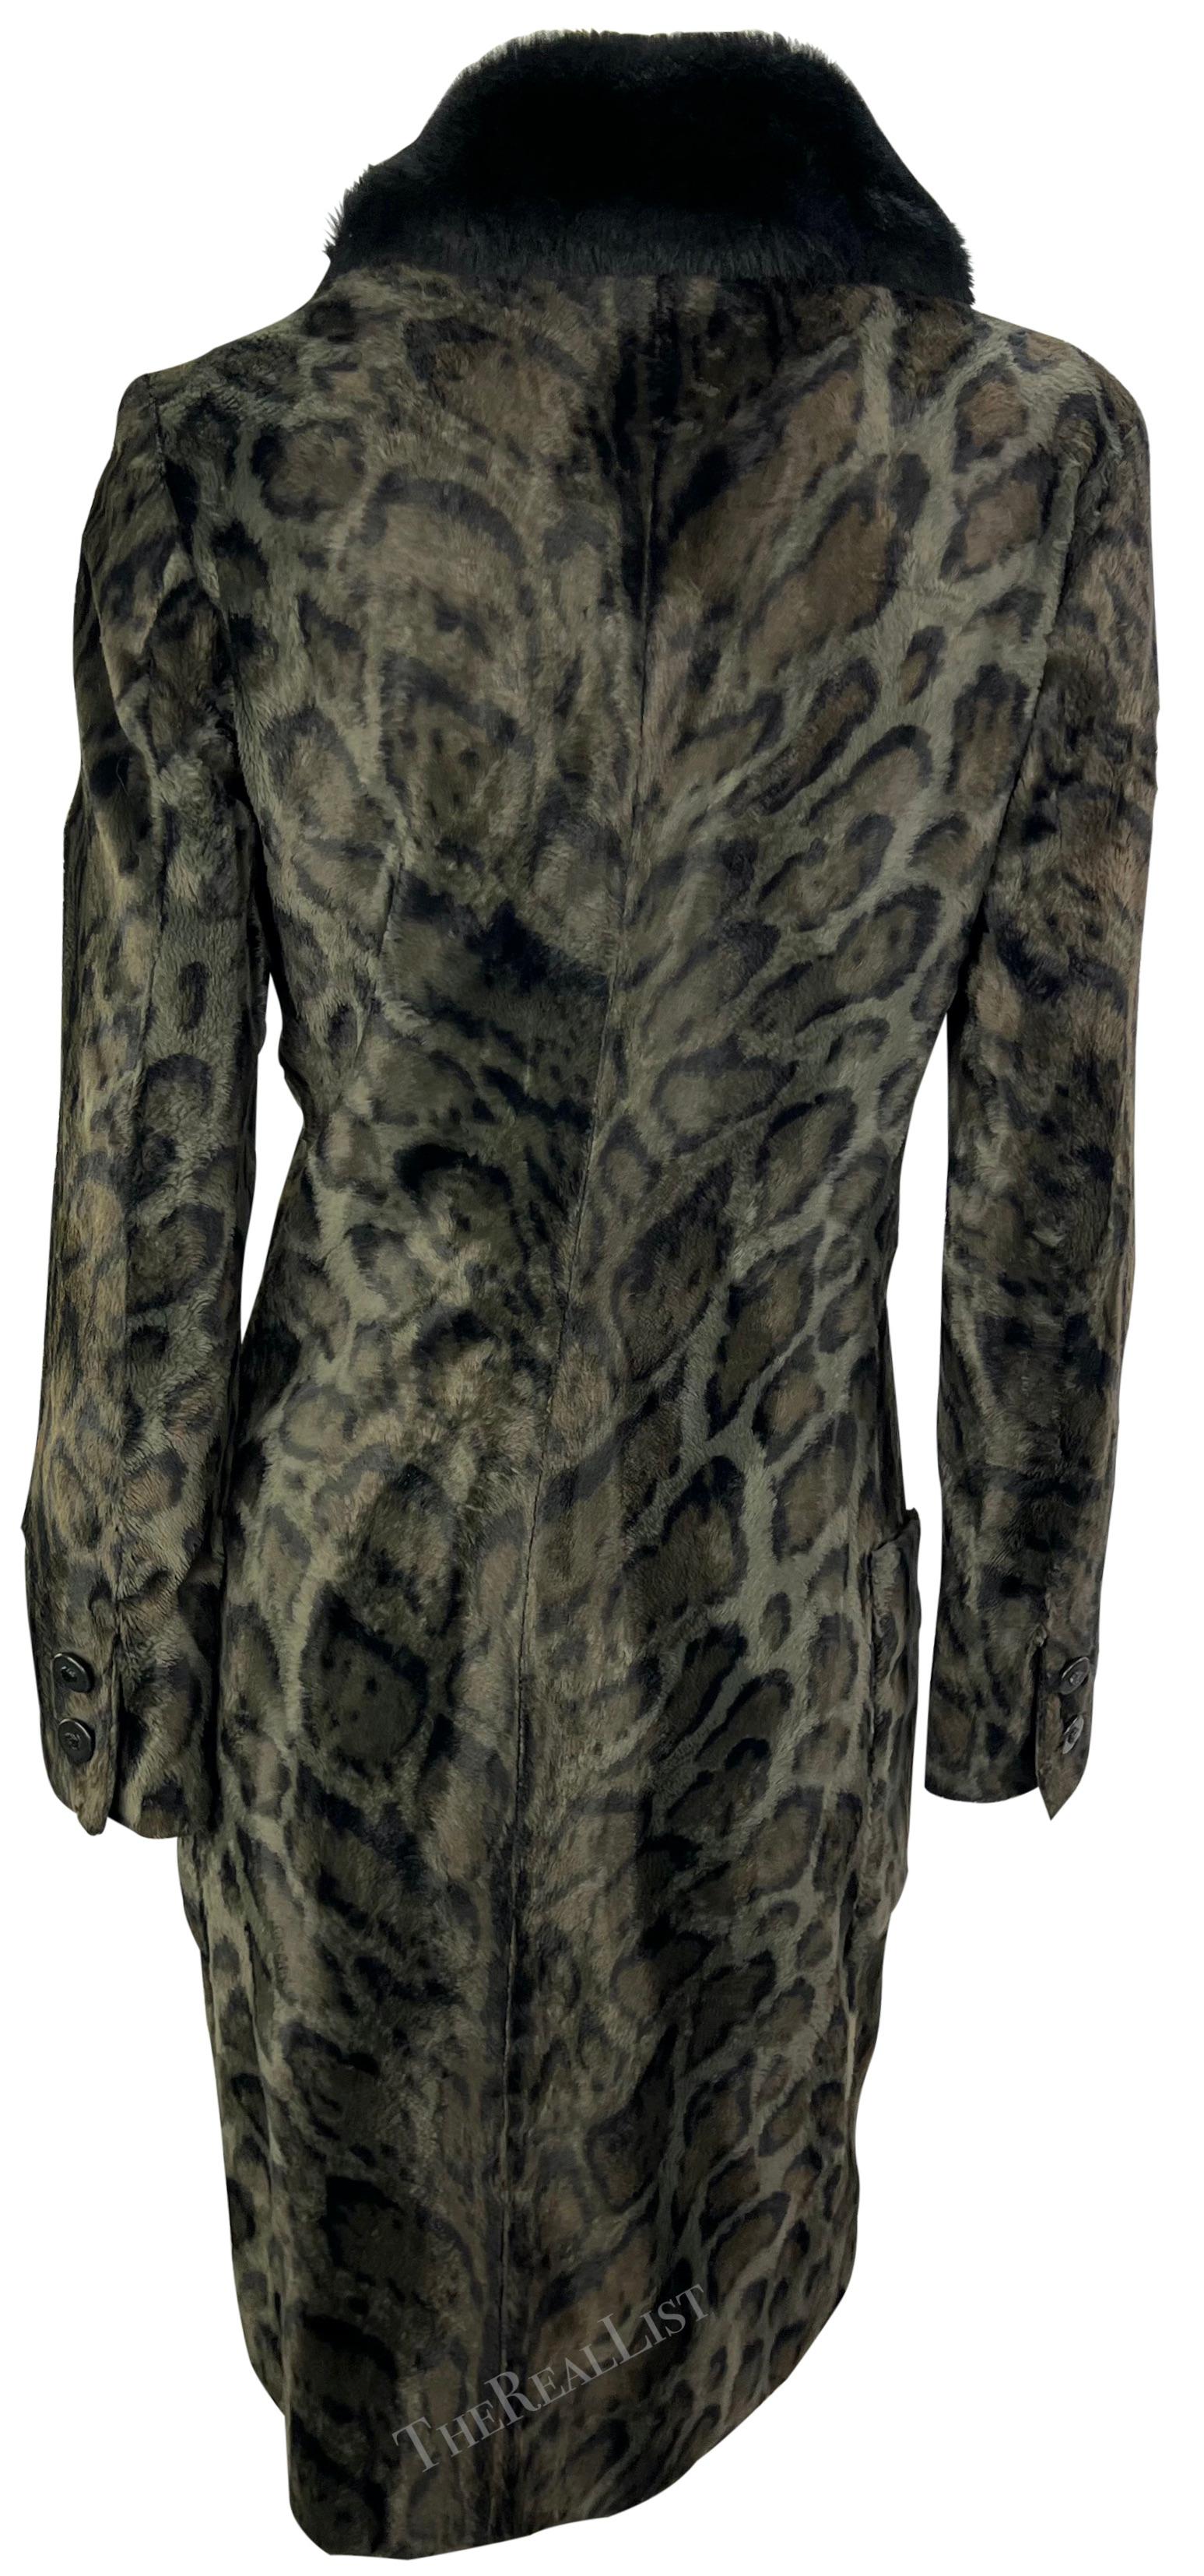 F/W 1996 Gianni Versace Black Leopard Faux Fur Sample Double Breasted Coat For Sale 1